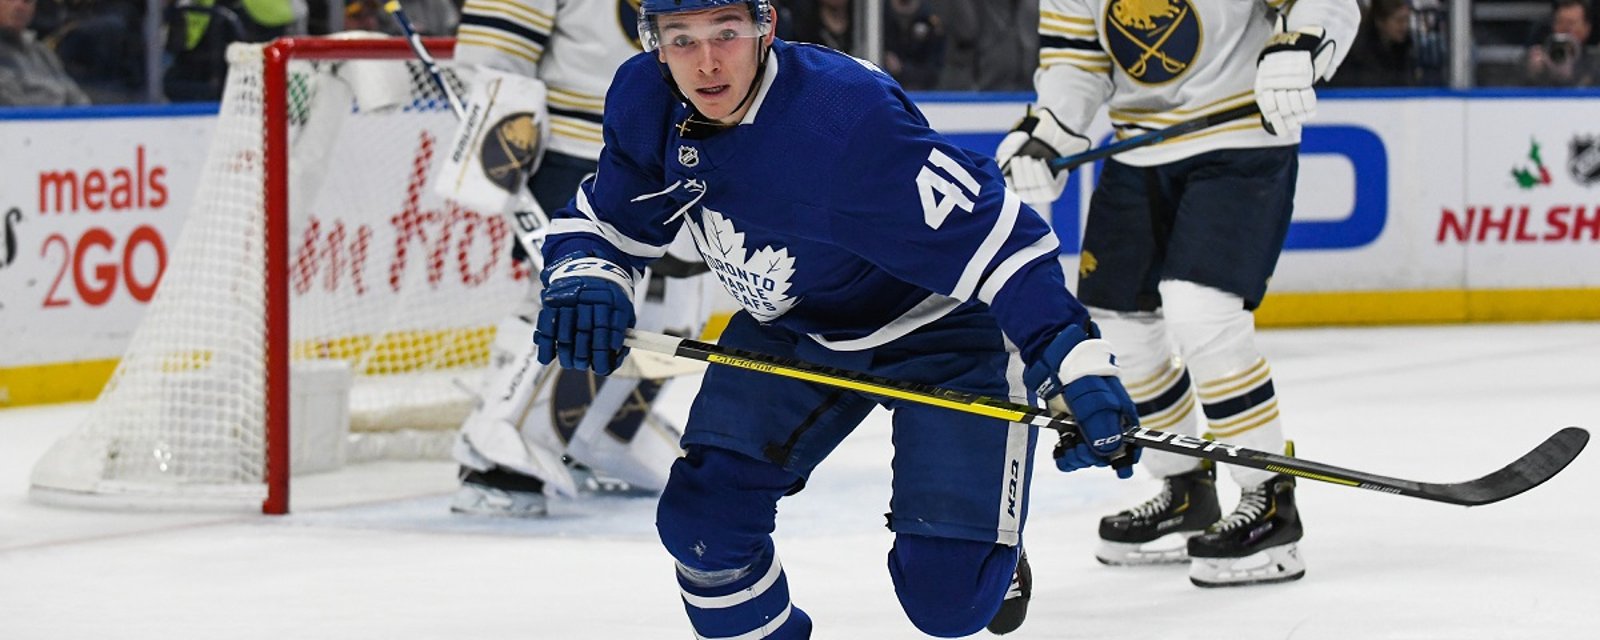 Dmytro Timashov sends a message to the Maple Leafs.